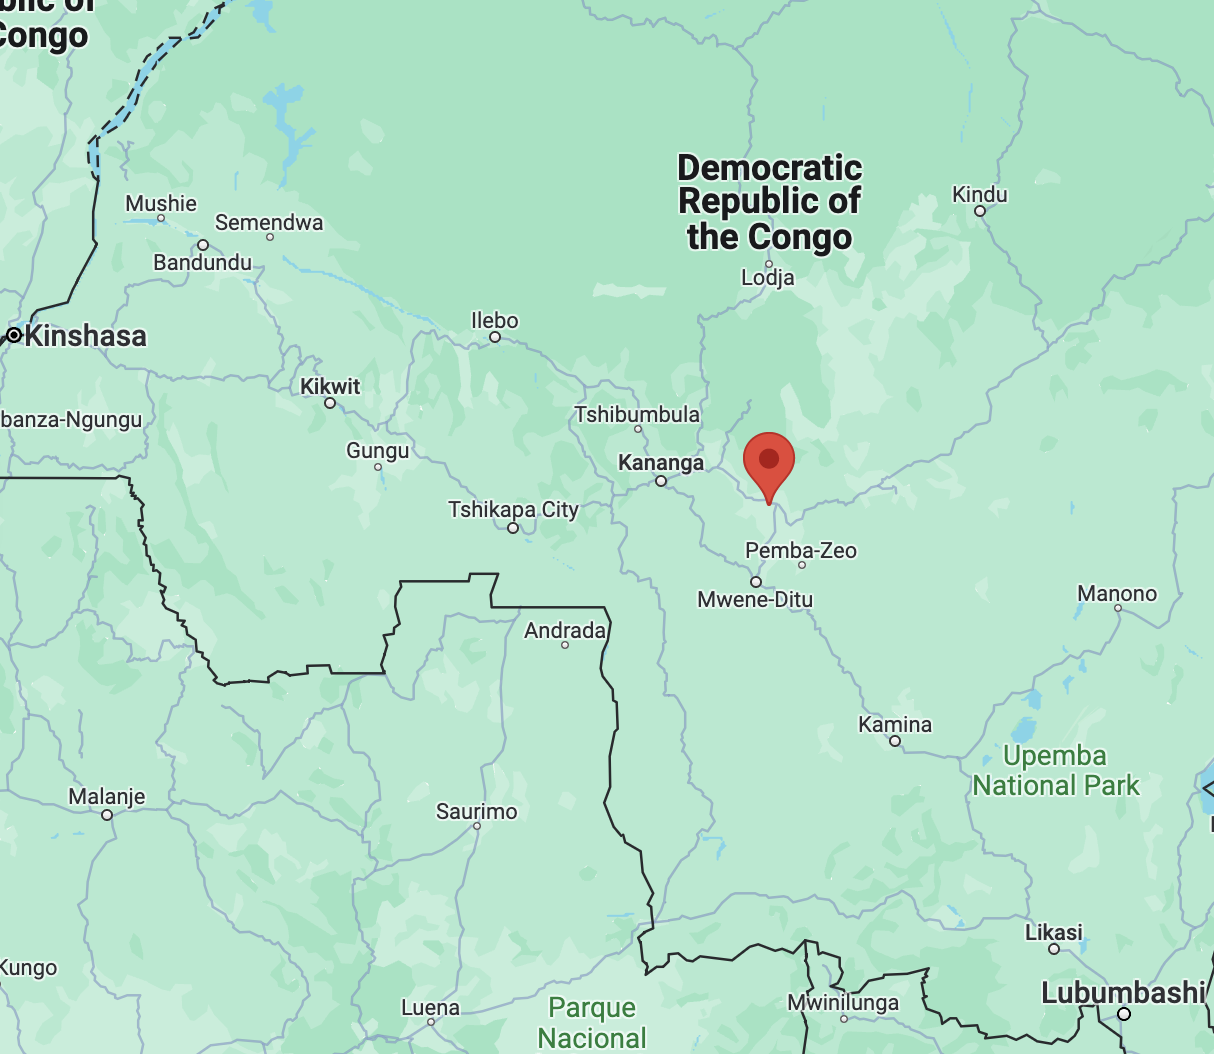 A map showing the location of Mbuji-Mayi in relation to the country of the Democratic Republic of the Congo. It lies in the western central region of the country midway between Kinshasa and Lubumbashi.